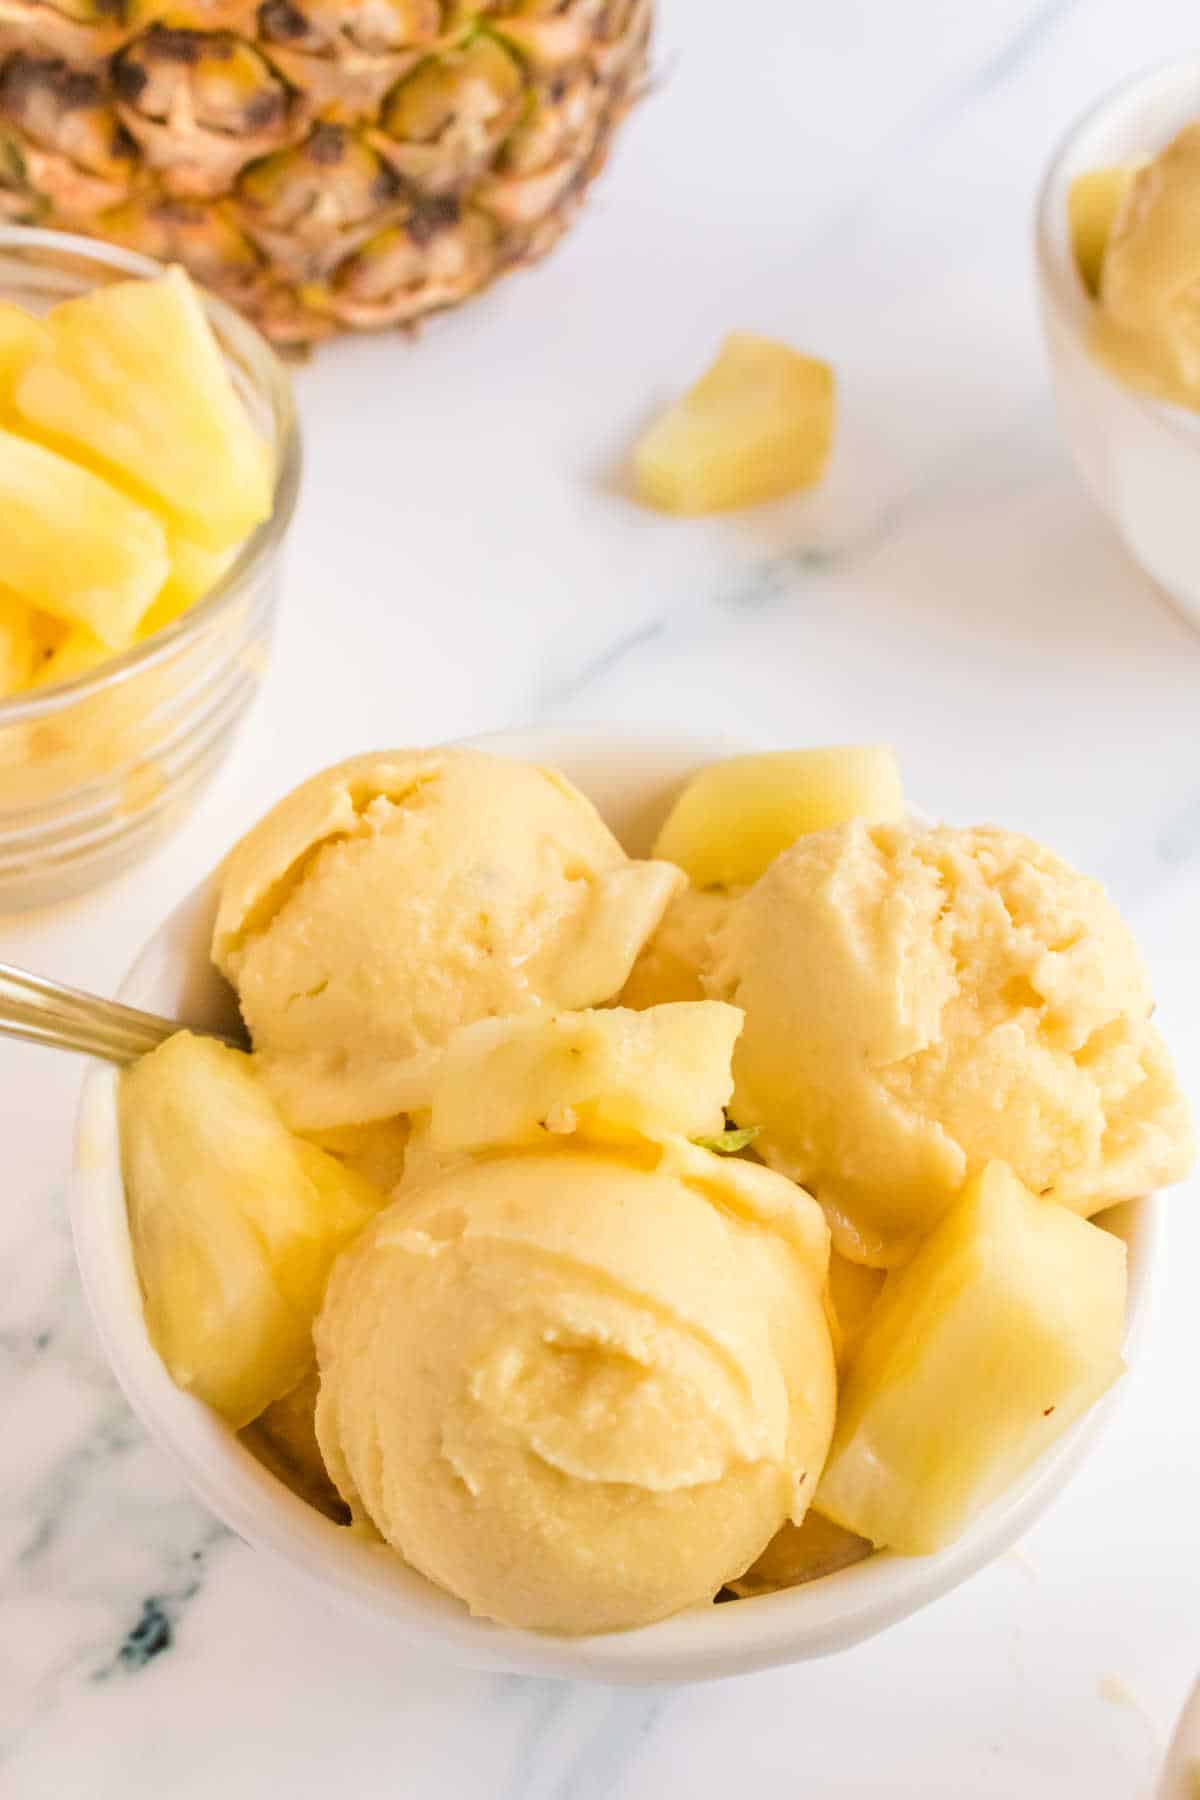 Pineapple Ice Cream in a bowl with a spoon.